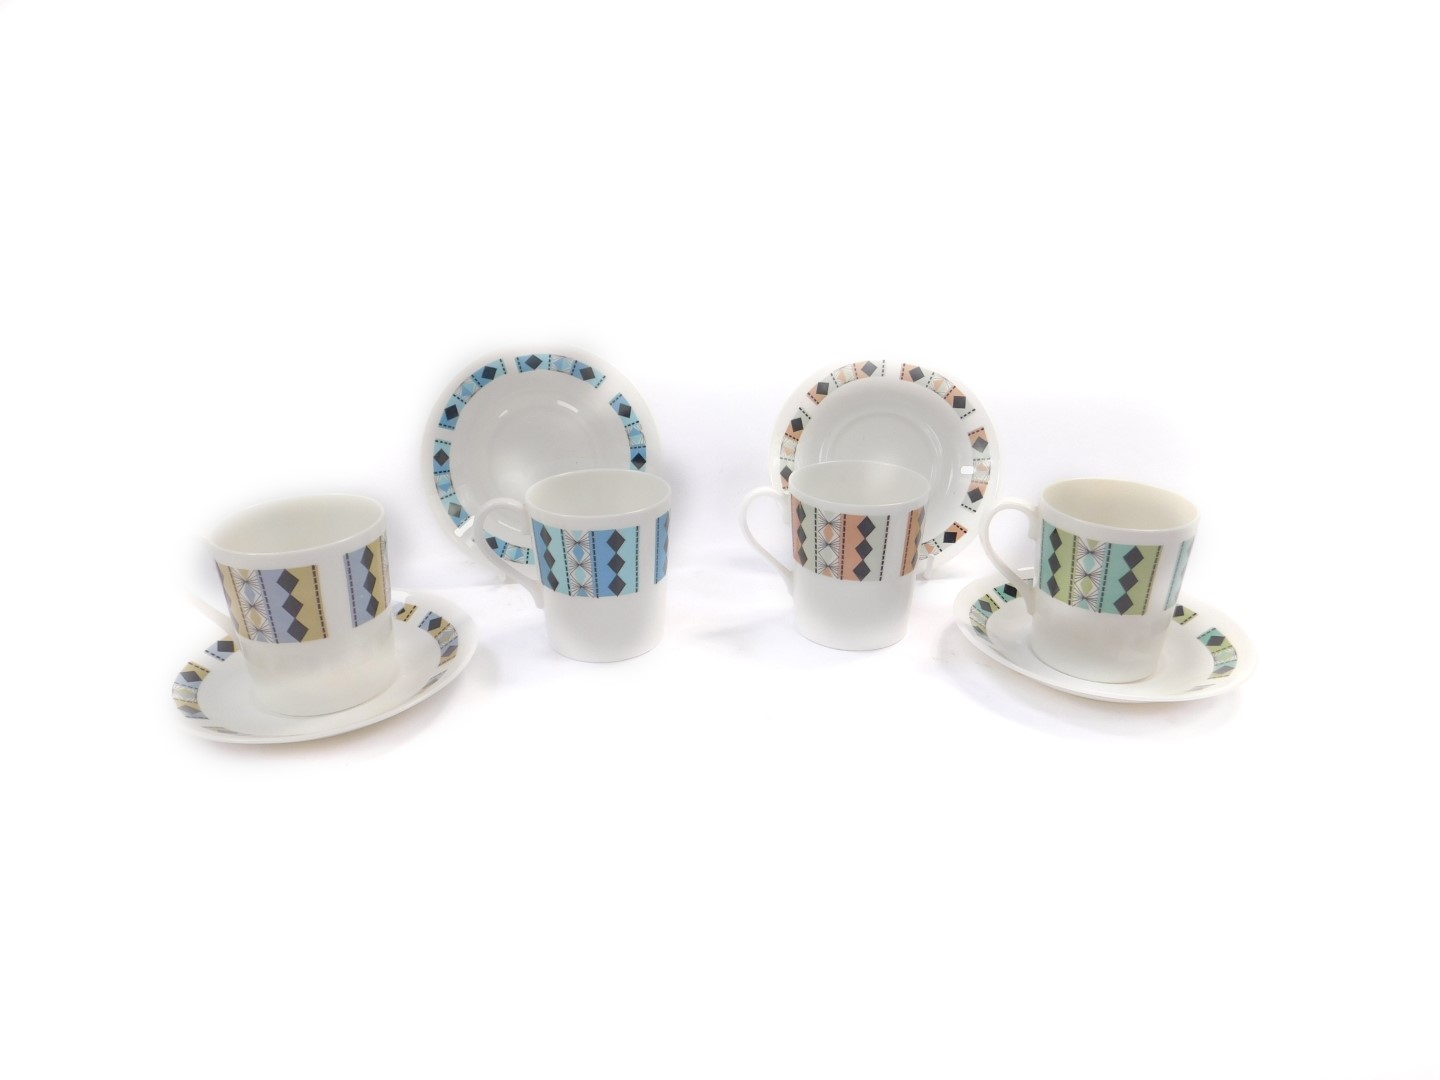 A set of four mid 20thC Royal Adderley porcelain coffee cups and saucers, decorated in the